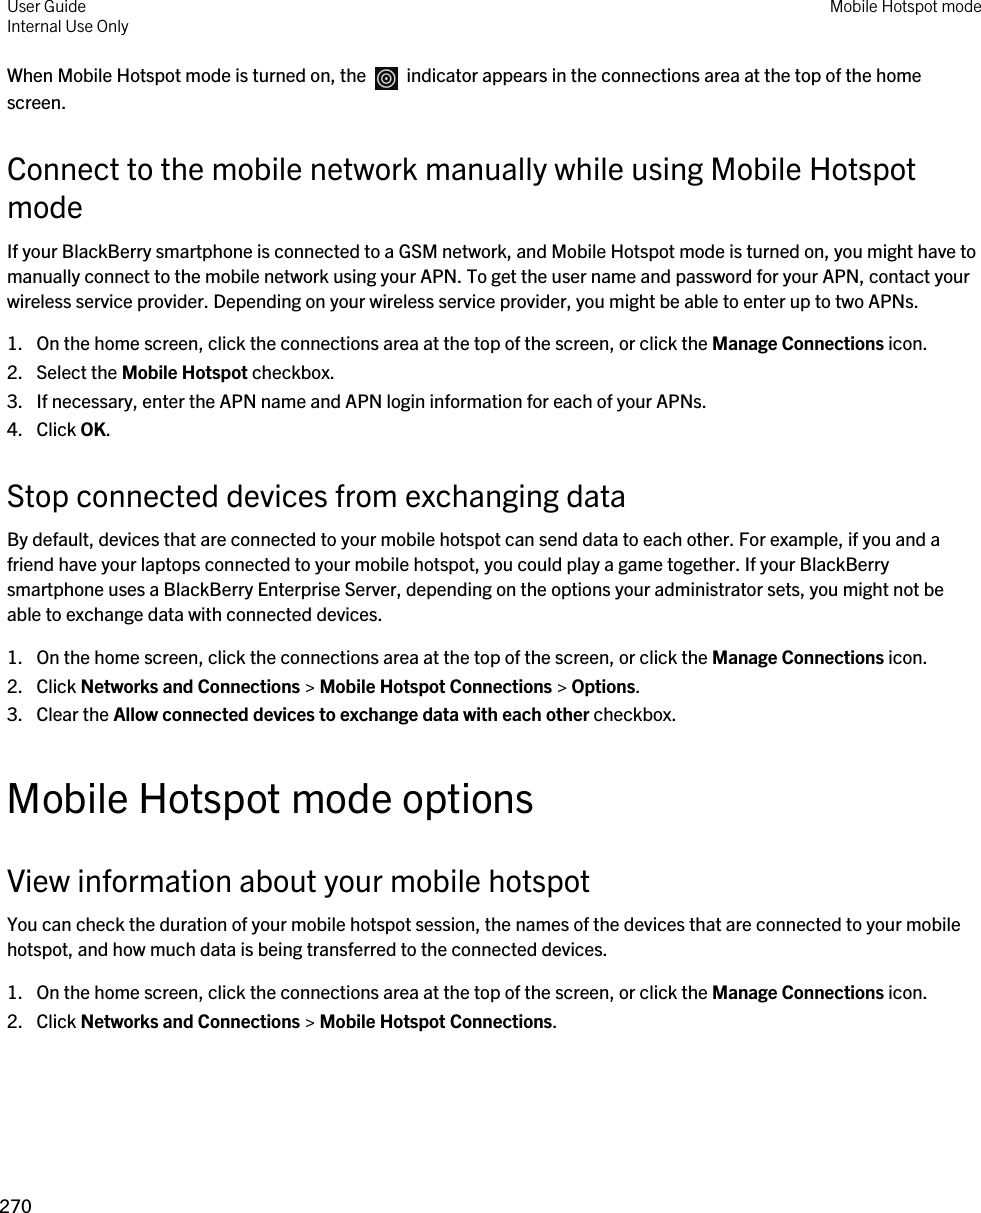 When Mobile Hotspot mode is turned on, the    indicator appears in the connections area at the top of the home screen.Connect to the mobile network manually while using Mobile Hotspot modeIf your BlackBerry smartphone is connected to a GSM network, and Mobile Hotspot mode is turned on, you might have to manually connect to the mobile network using your APN. To get the user name and password for your APN, contact your wireless service provider. Depending on your wireless service provider, you might be able to enter up to two APNs.1. On the home screen, click the connections area at the top of the screen, or click the Manage Connections icon.2. Select the Mobile Hotspot checkbox.3. If necessary, enter the APN name and APN login information for each of your APNs.4. Click OK.Stop connected devices from exchanging dataBy default, devices that are connected to your mobile hotspot can send data to each other. For example, if you and a friend have your laptops connected to your mobile hotspot, you could play a game together. If your BlackBerry smartphone uses a BlackBerry Enterprise Server, depending on the options your administrator sets, you might not be able to exchange data with connected devices.1. On the home screen, click the connections area at the top of the screen, or click the Manage Connections icon.2. Click Networks and Connections &gt; Mobile Hotspot Connections &gt; Options.3. Clear the Allow connected devices to exchange data with each other checkbox.Mobile Hotspot mode optionsView information about your mobile hotspotYou can check the duration of your mobile hotspot session, the names of the devices that are connected to your mobile hotspot, and how much data is being transferred to the connected devices.1. On the home screen, click the connections area at the top of the screen, or click the Manage Connections icon.2. Click Networks and Connections &gt; Mobile Hotspot Connections.User GuideInternal Use Only Mobile Hotspot mode270 